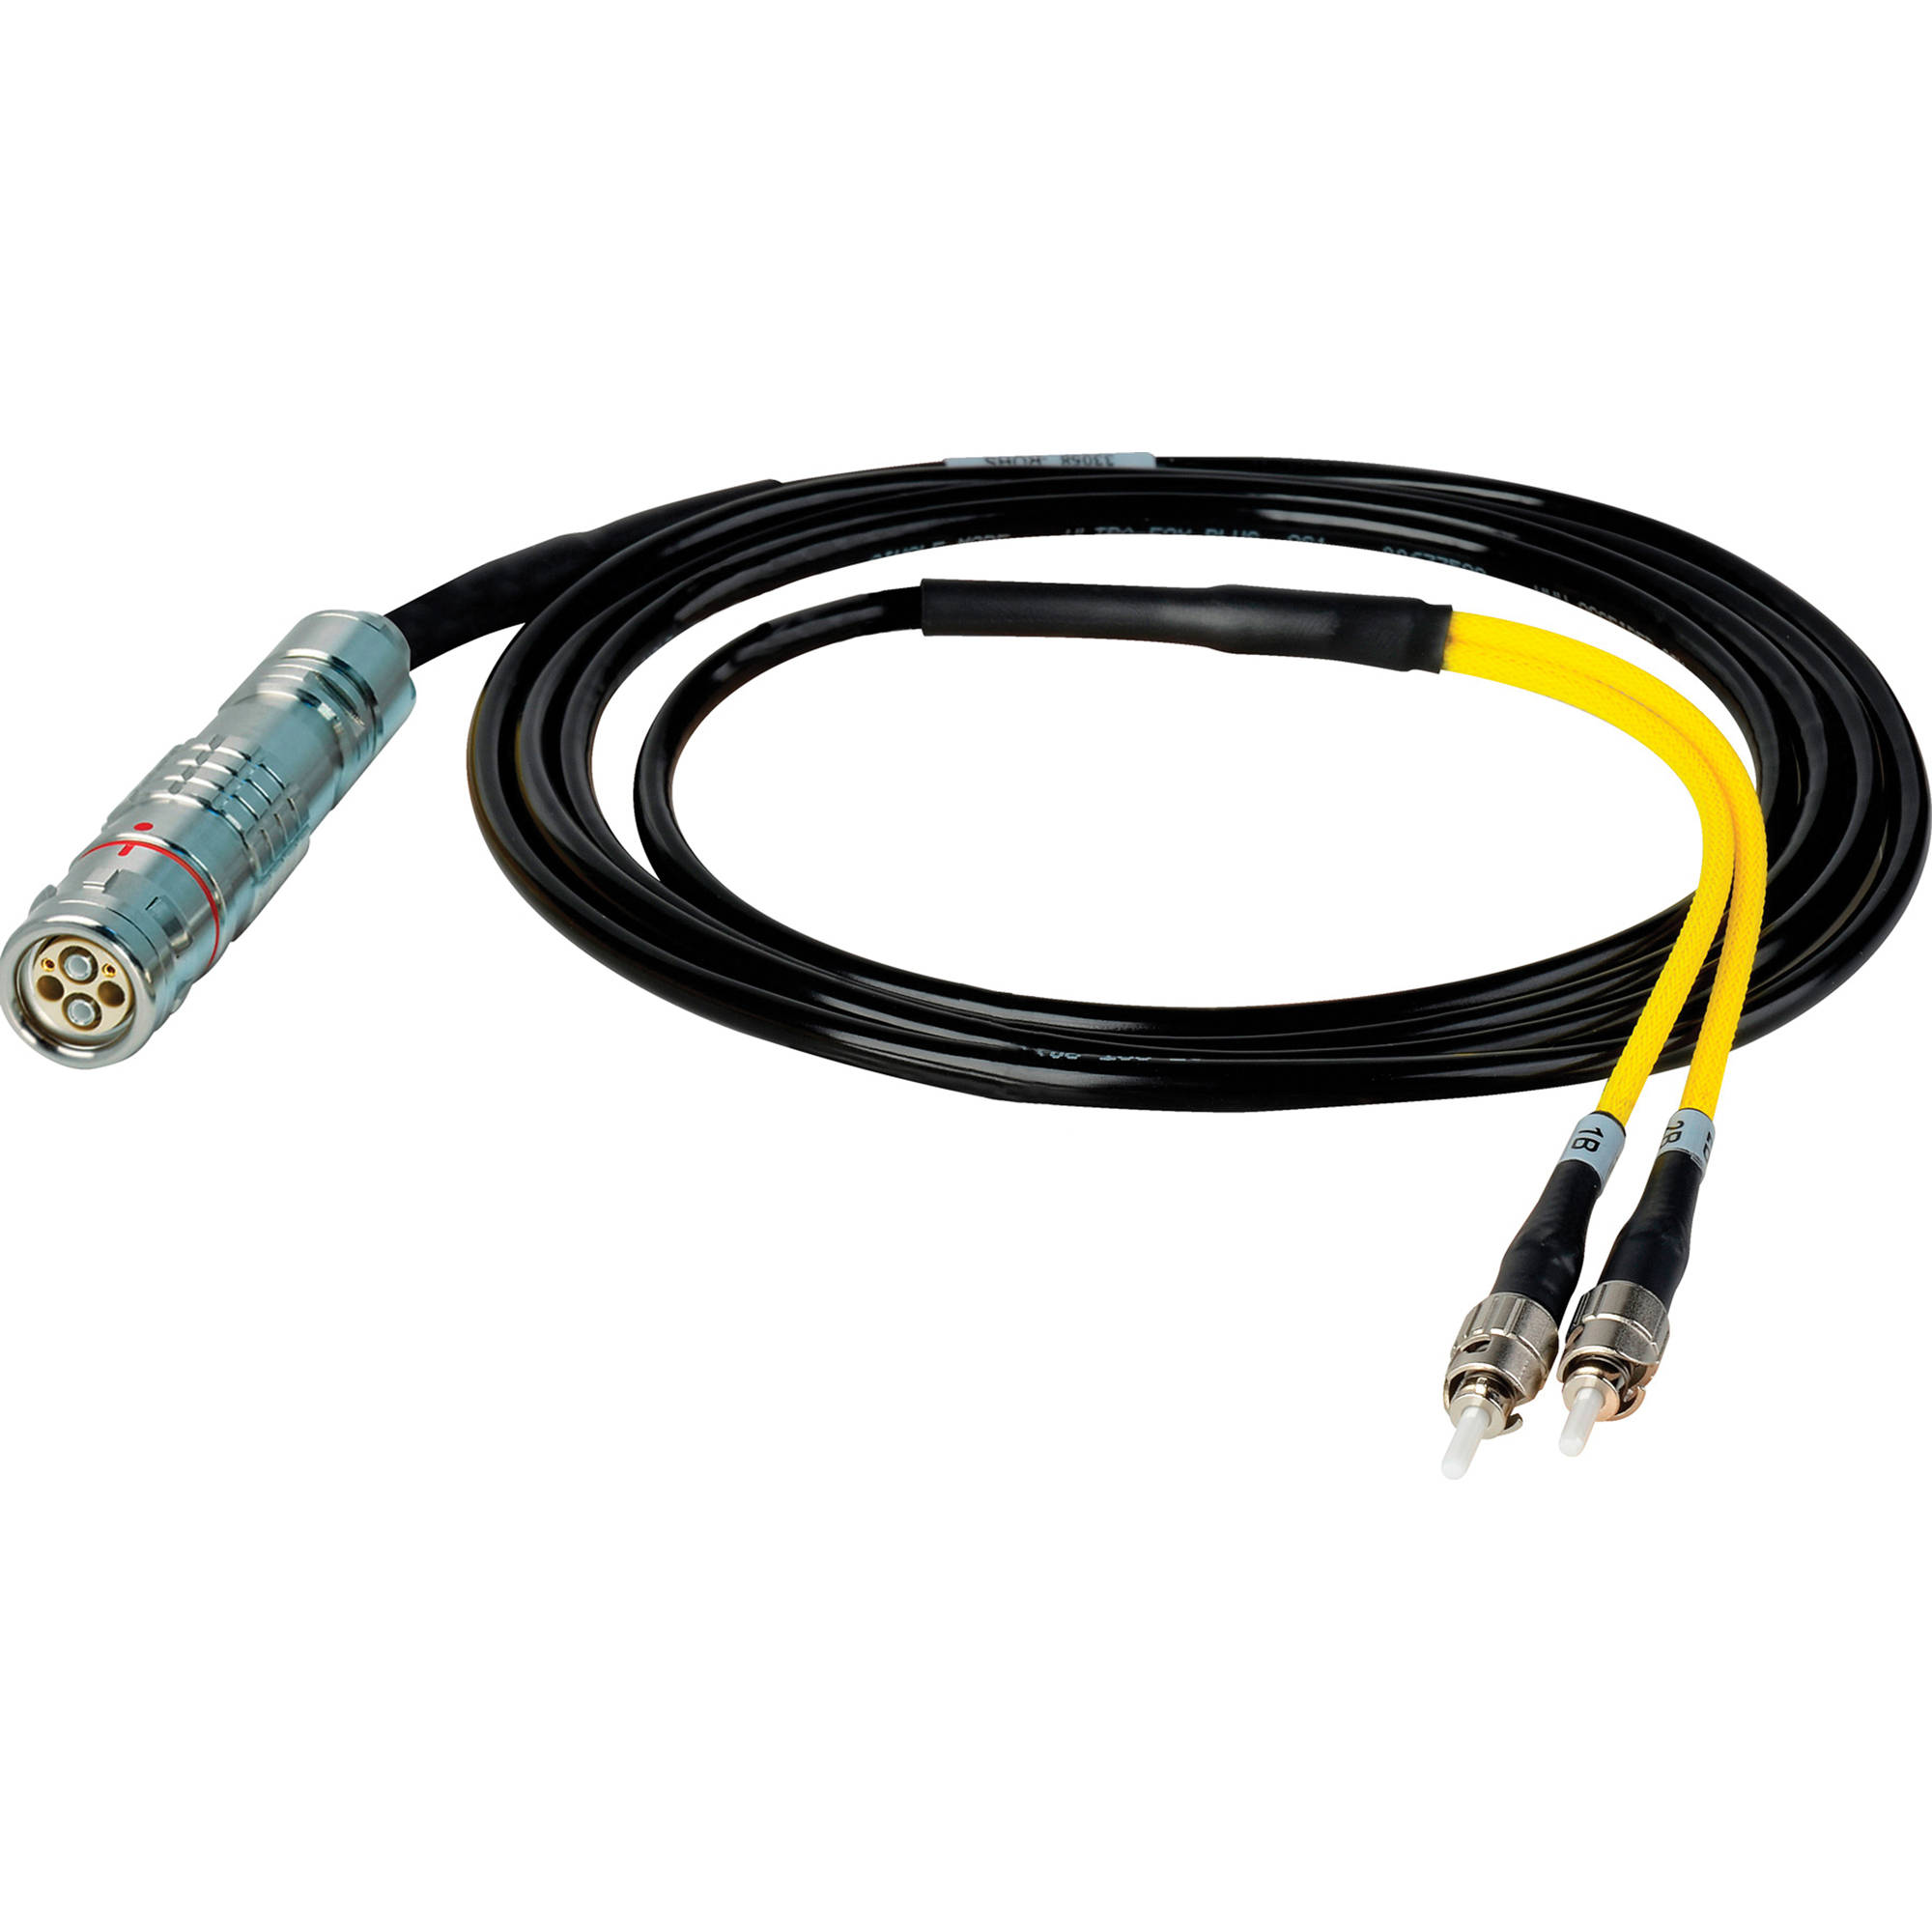 Camplex LEMO FUW to Dual ST In-Line Fiber Optic Breakout Cable - 75 Foot